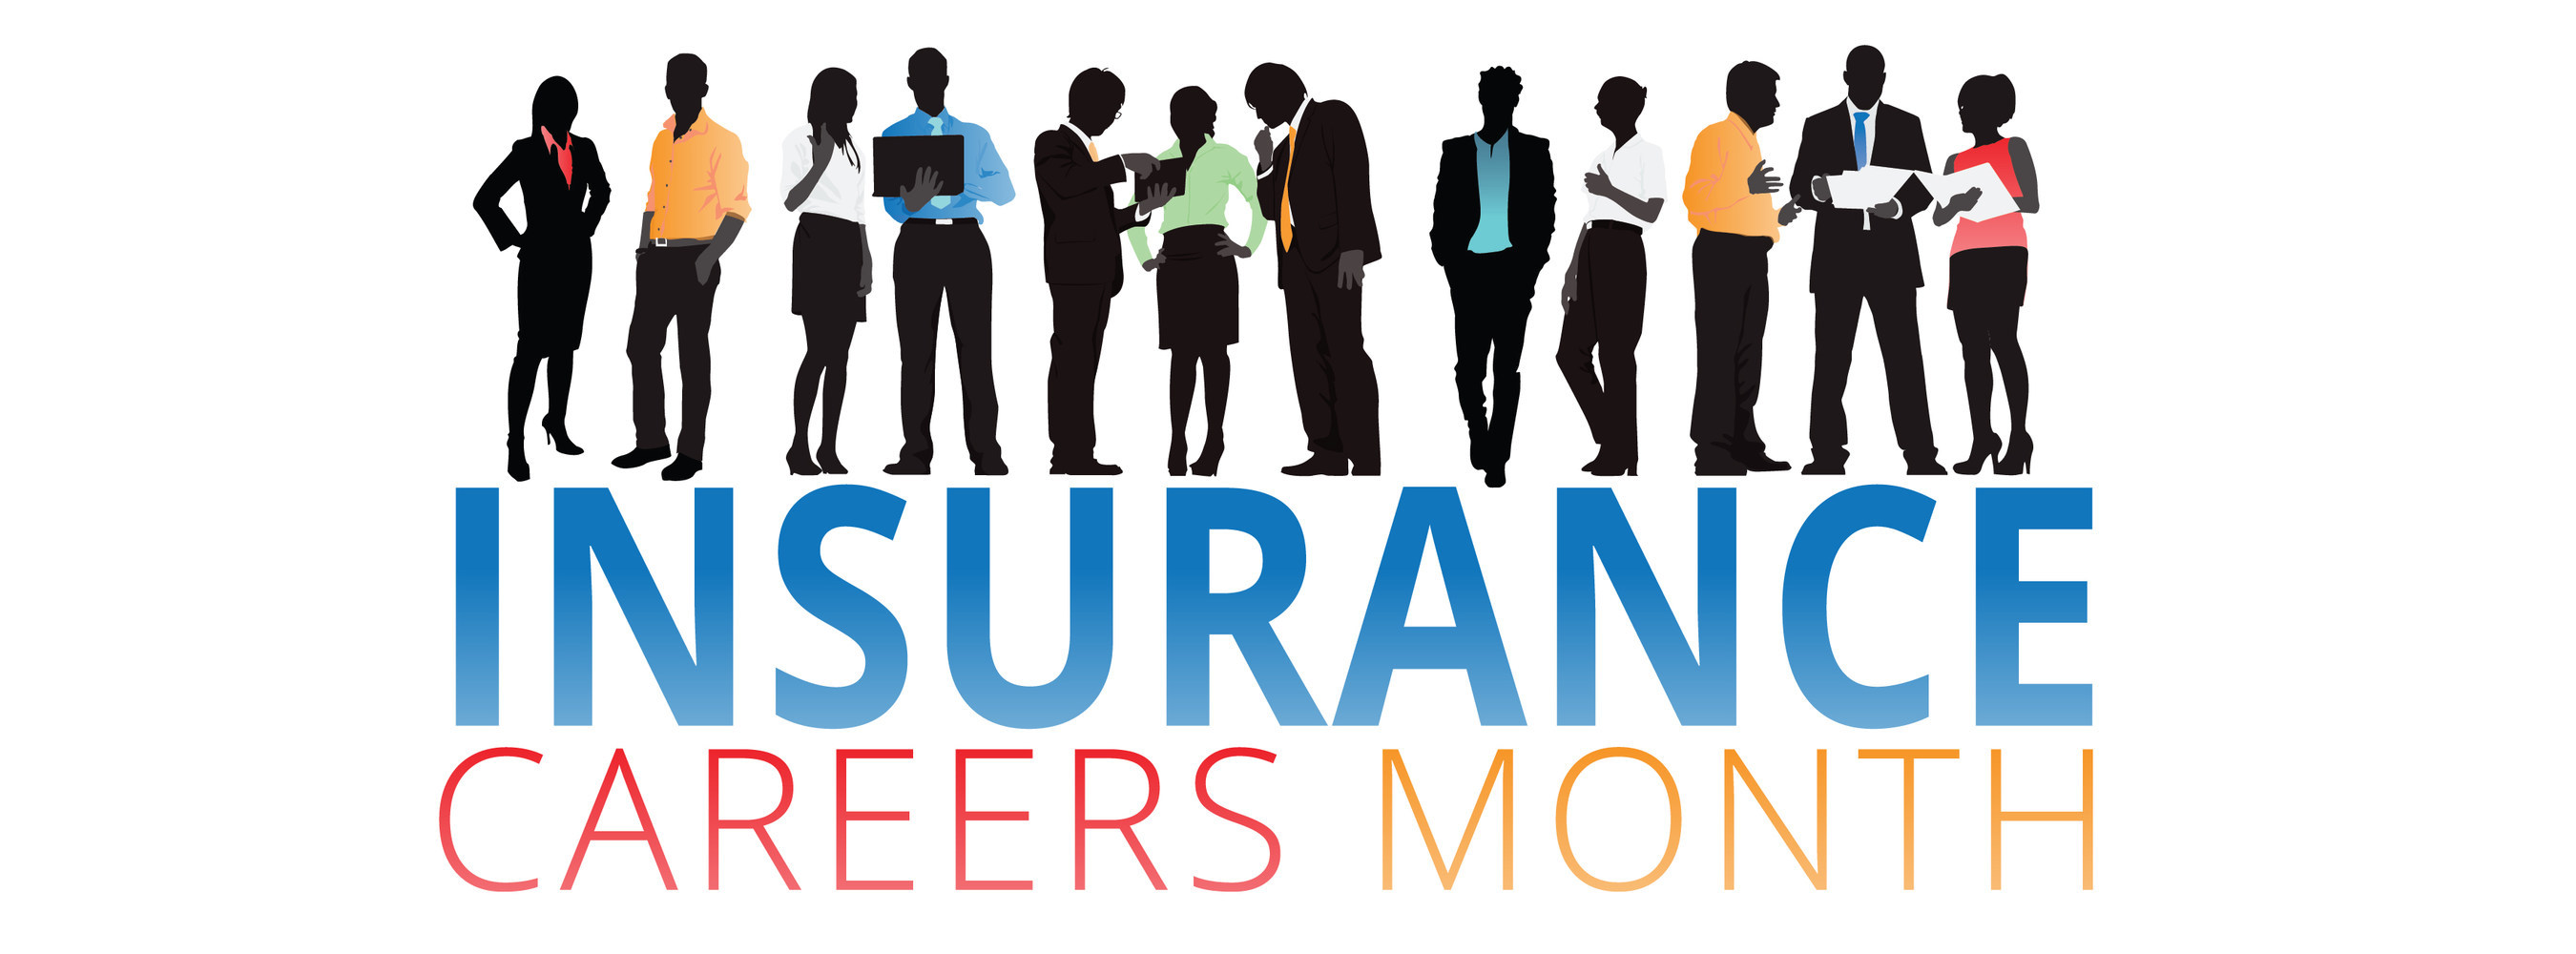 Second Annual Insurance Careers Month Kicks Off as Initiative Goes Global